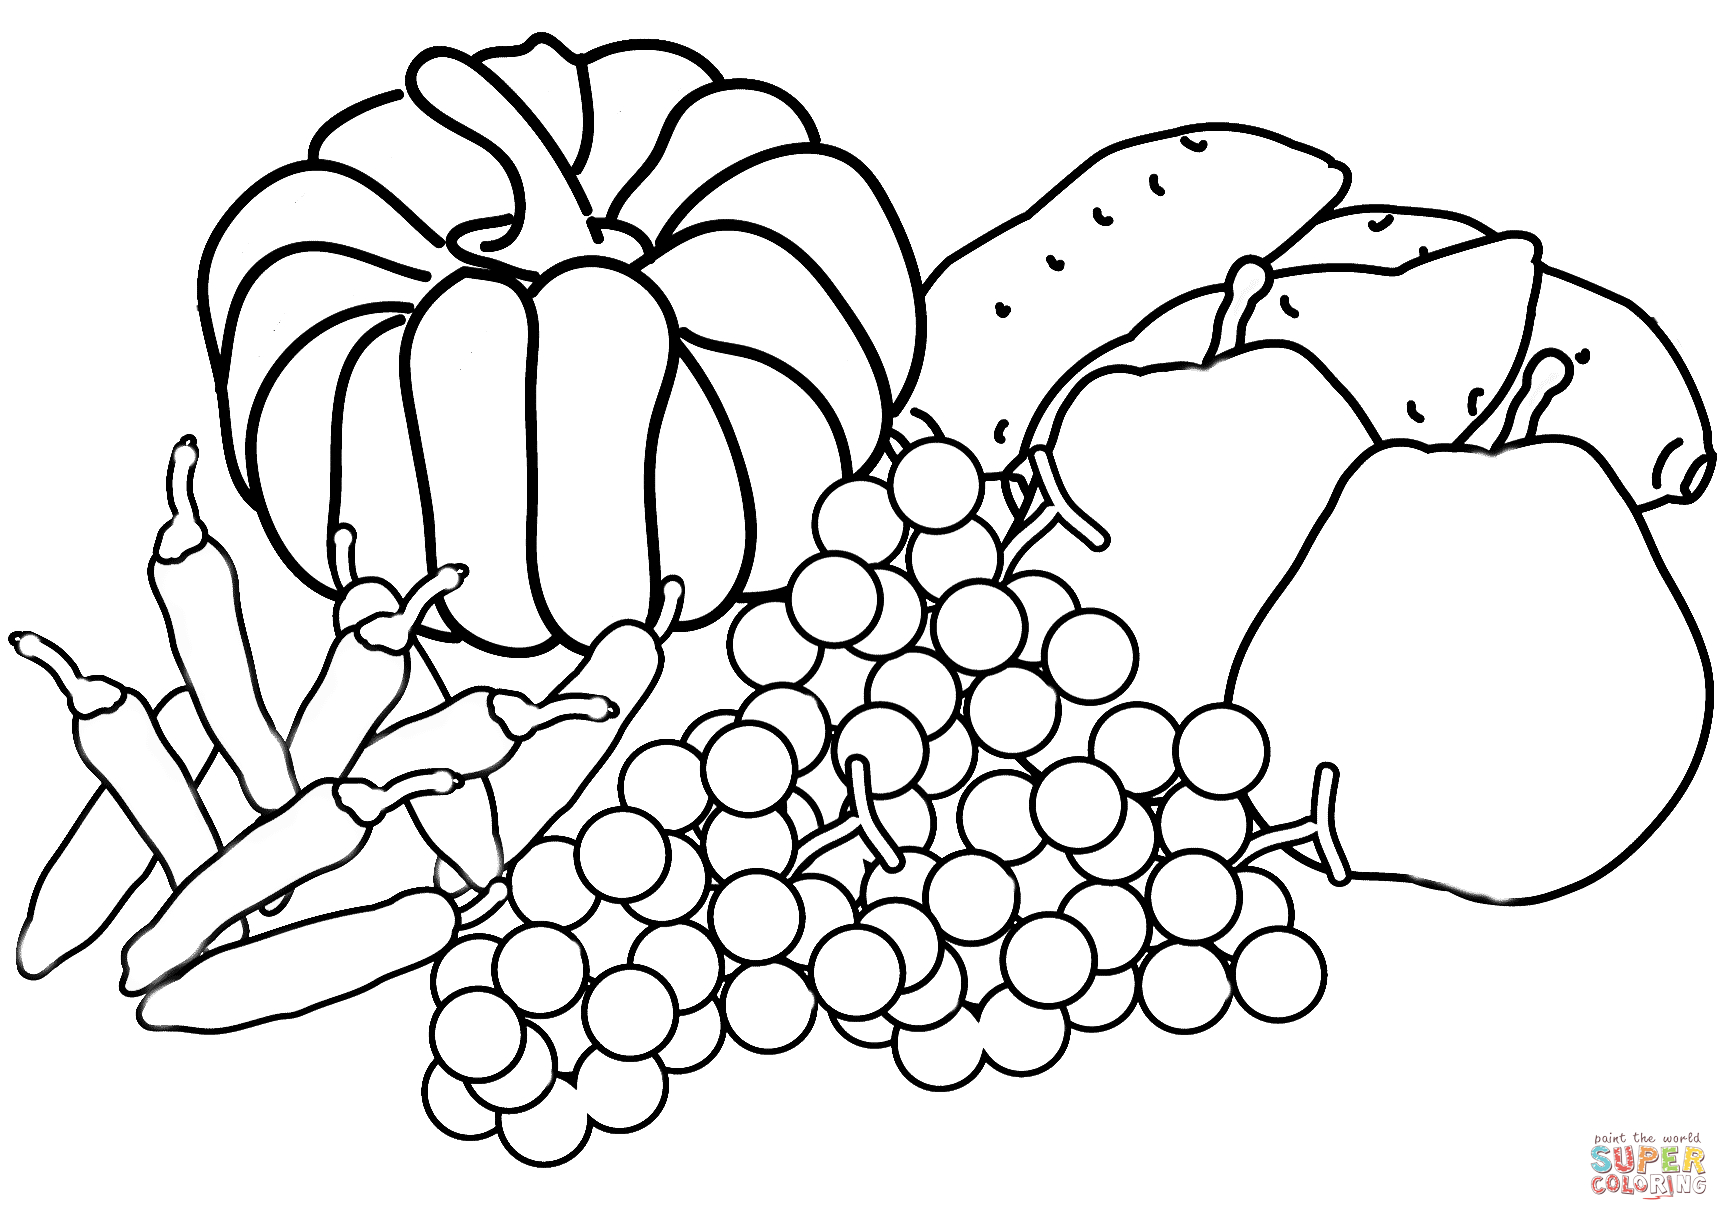 Free Printable Fall Harvest Coloring Pages | Free Printable